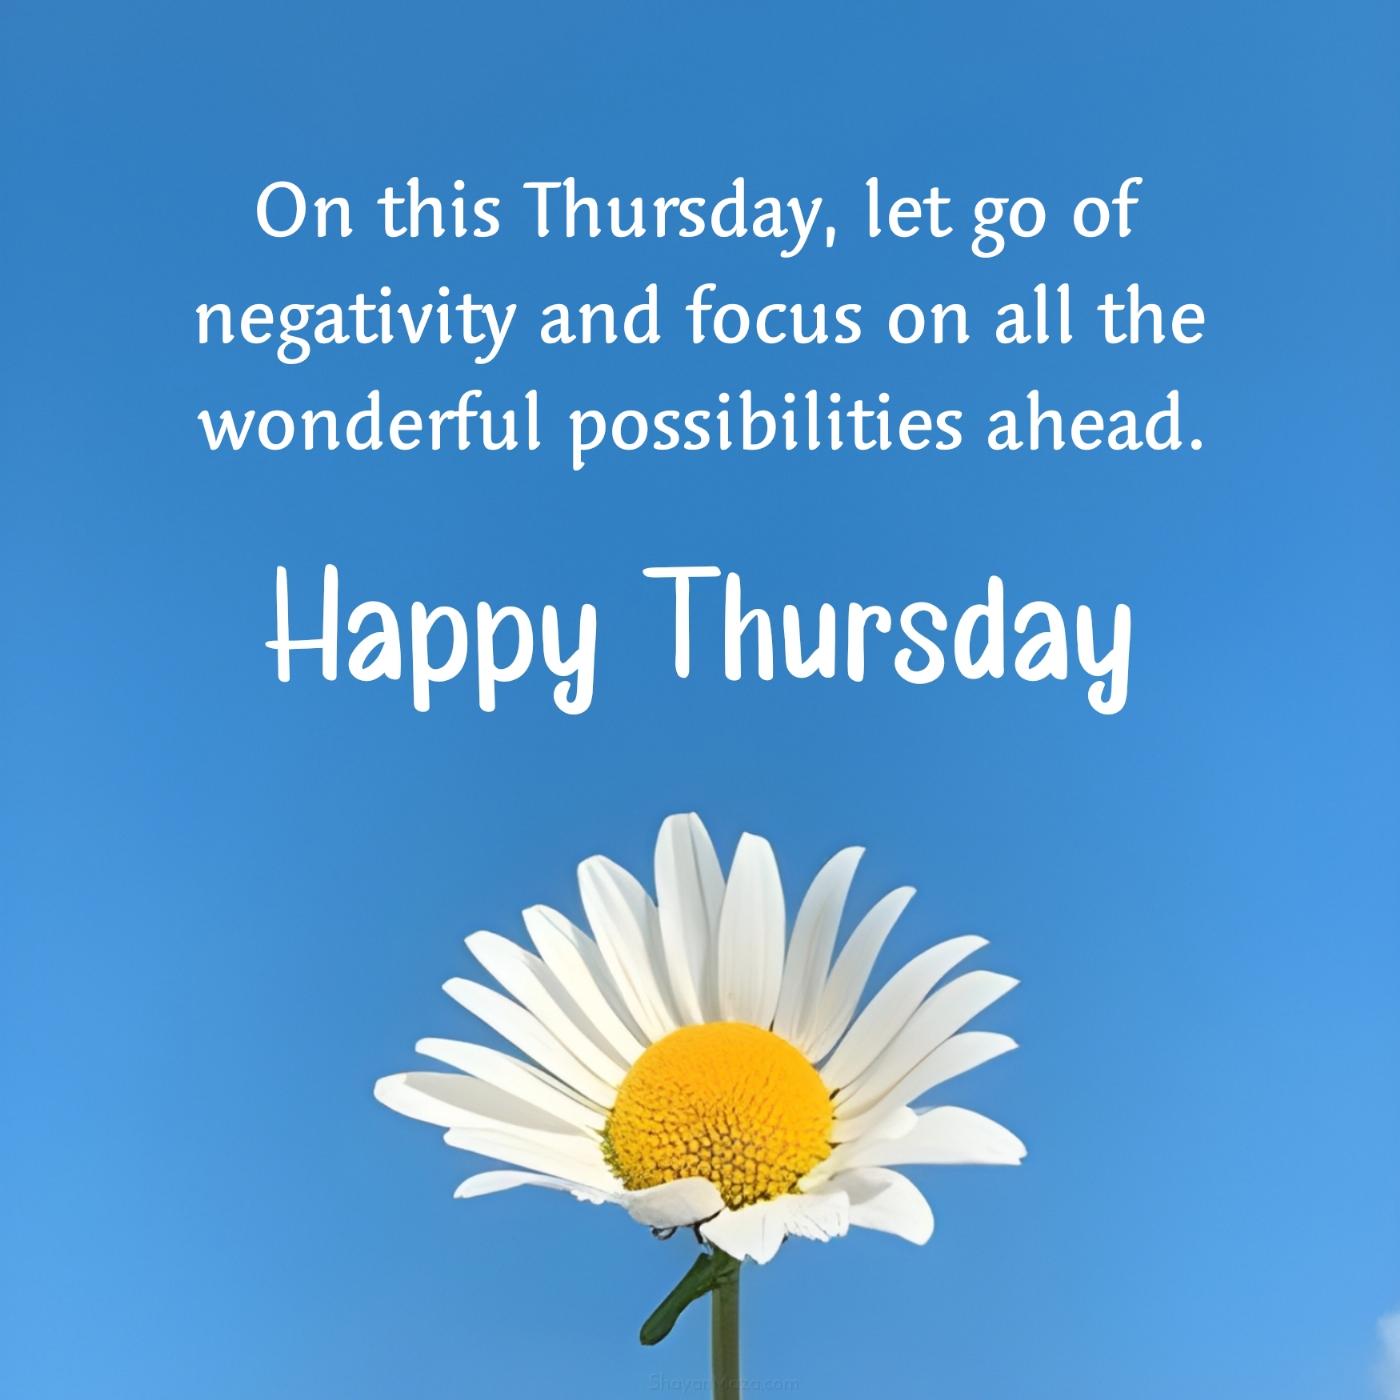 On this Thursday let go of negativity and focus on all